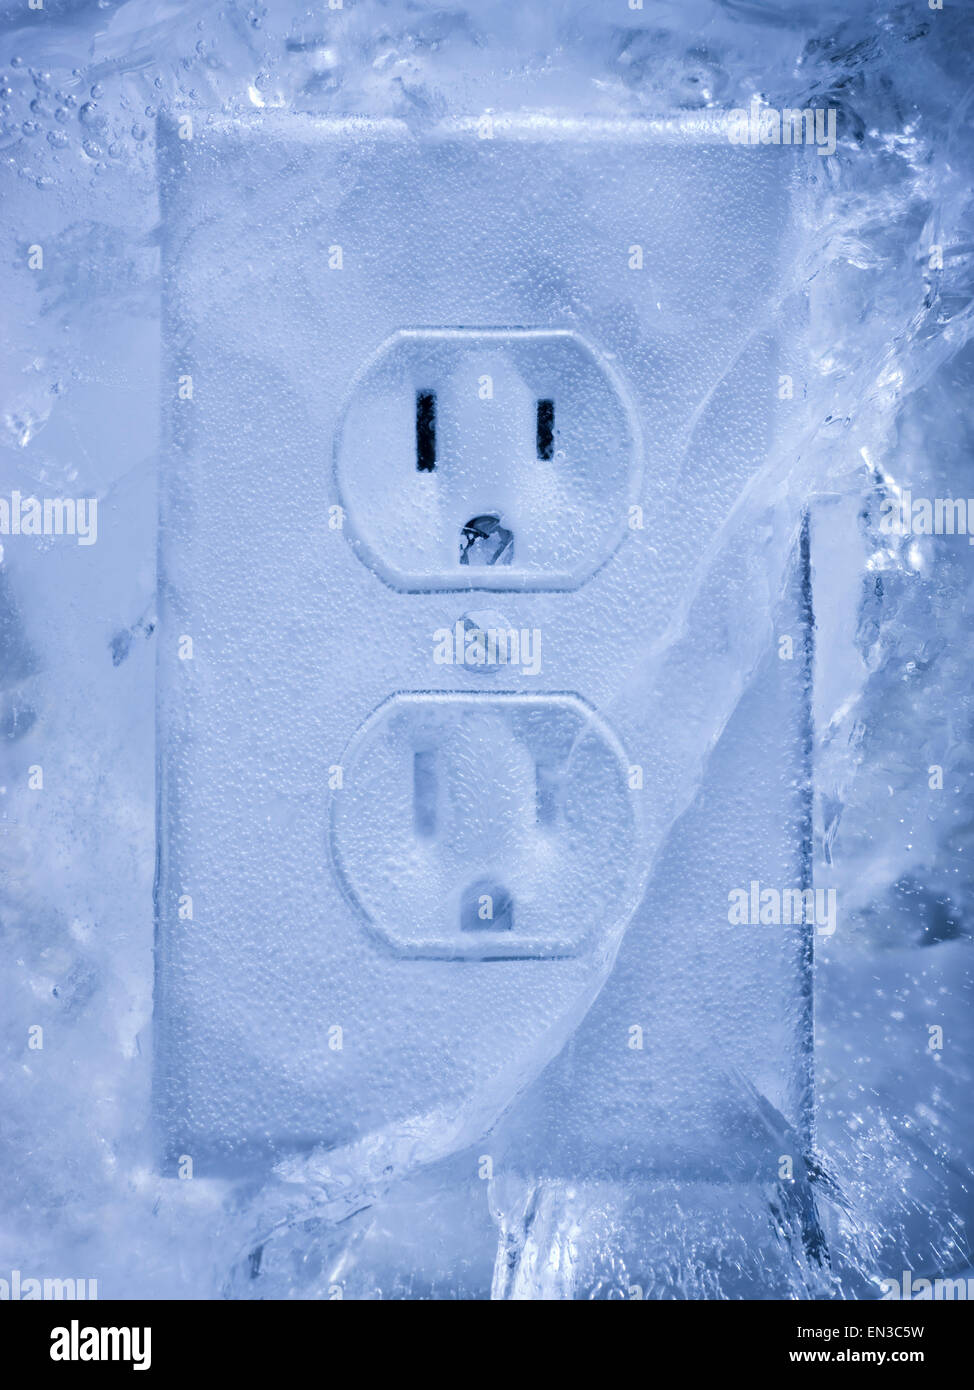 electrical outlet frozen in a block of ice Stock Photo